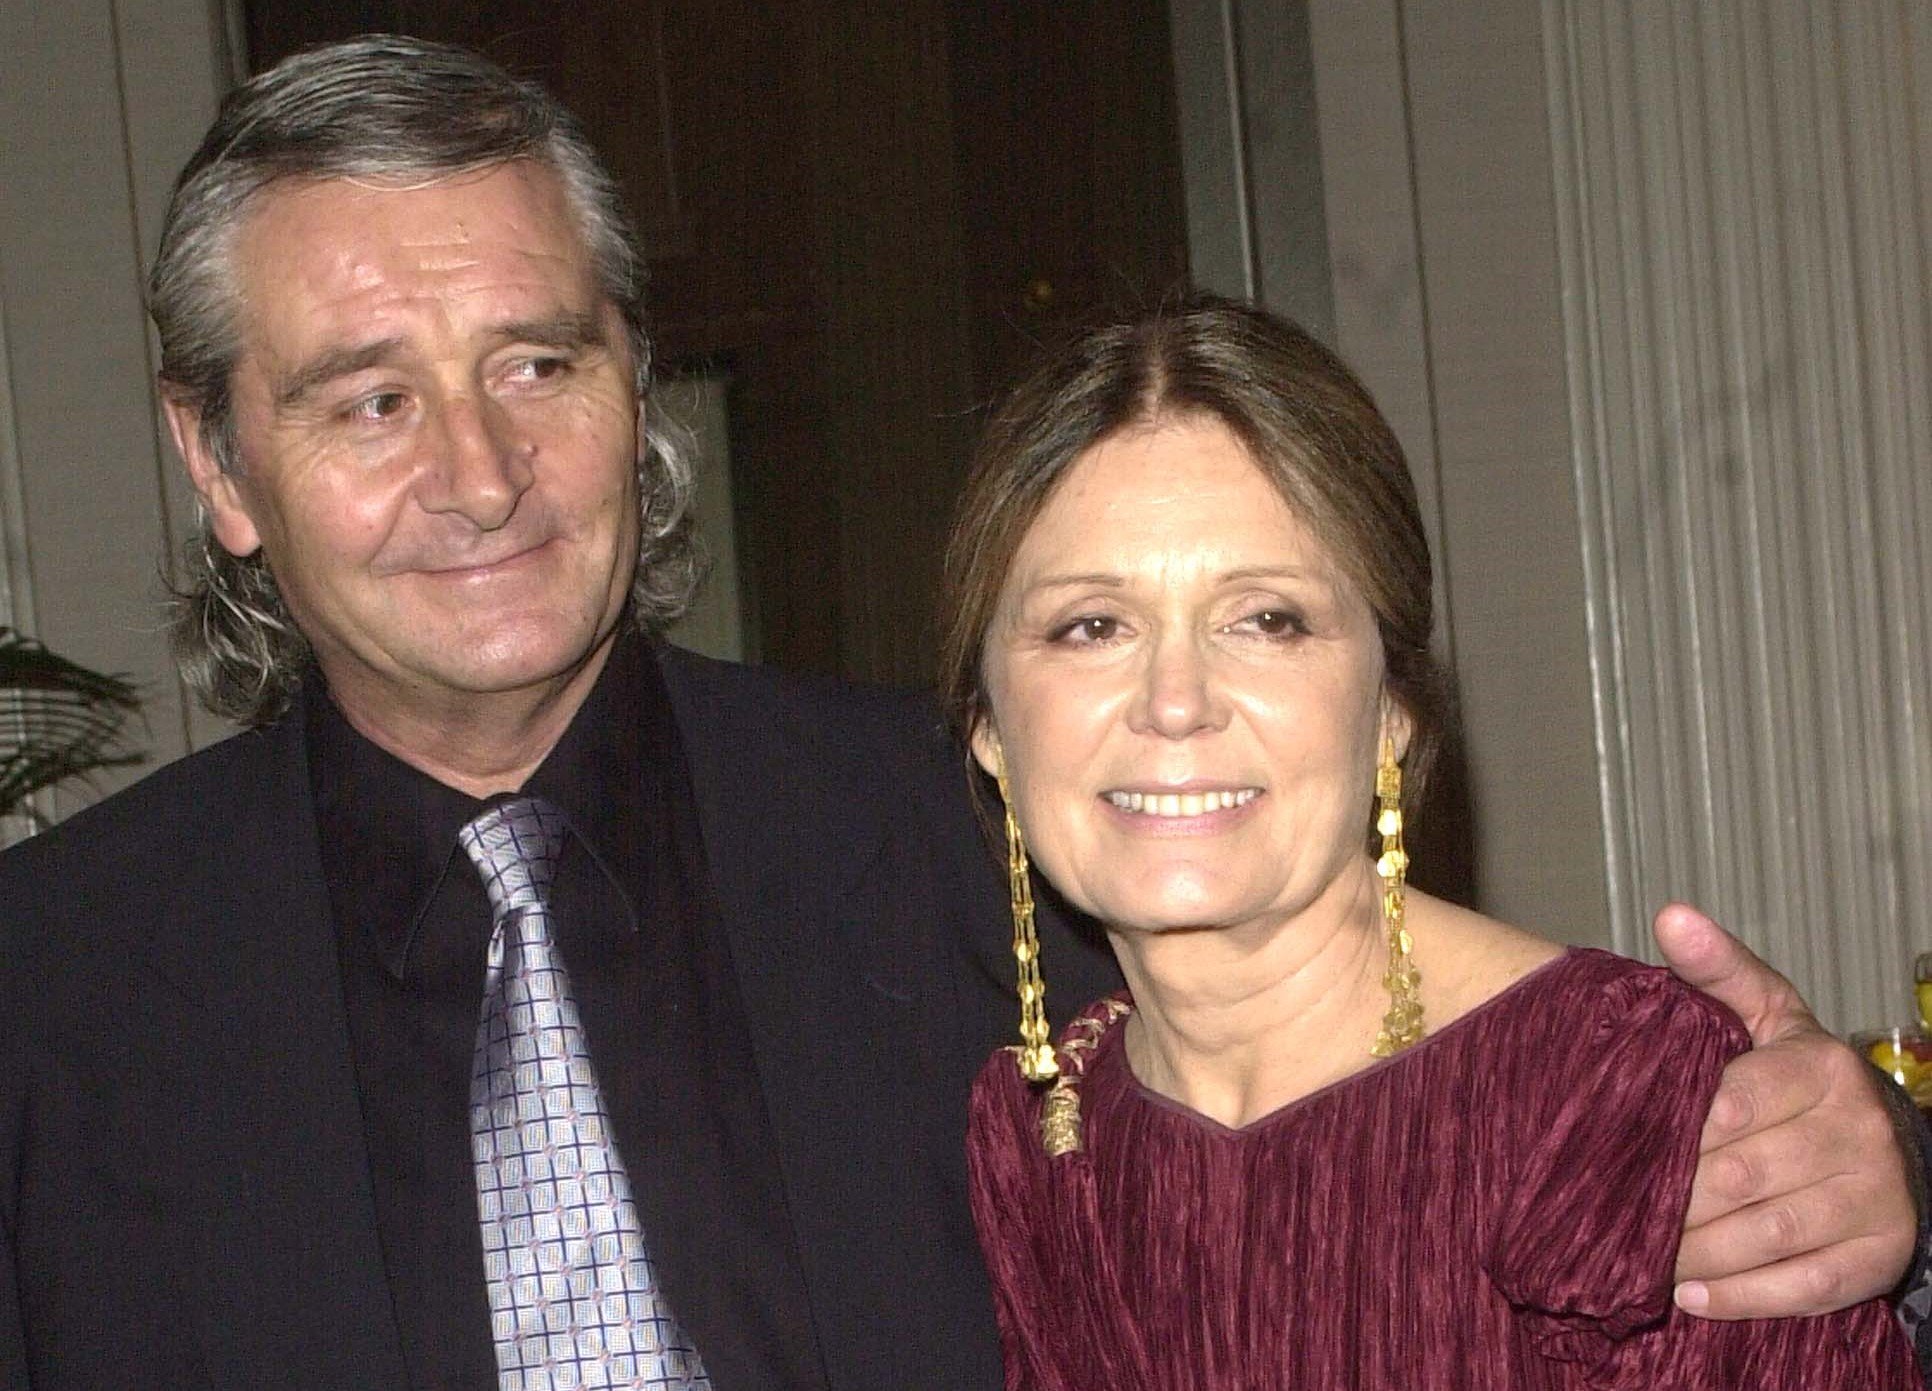 Author Gloria Steinem and David Bale arrive for the Ms. Foundation for Women's 14th Annual Gloria Steinem Awards on May 16, 2002 in New York City. | Source: Getty Images